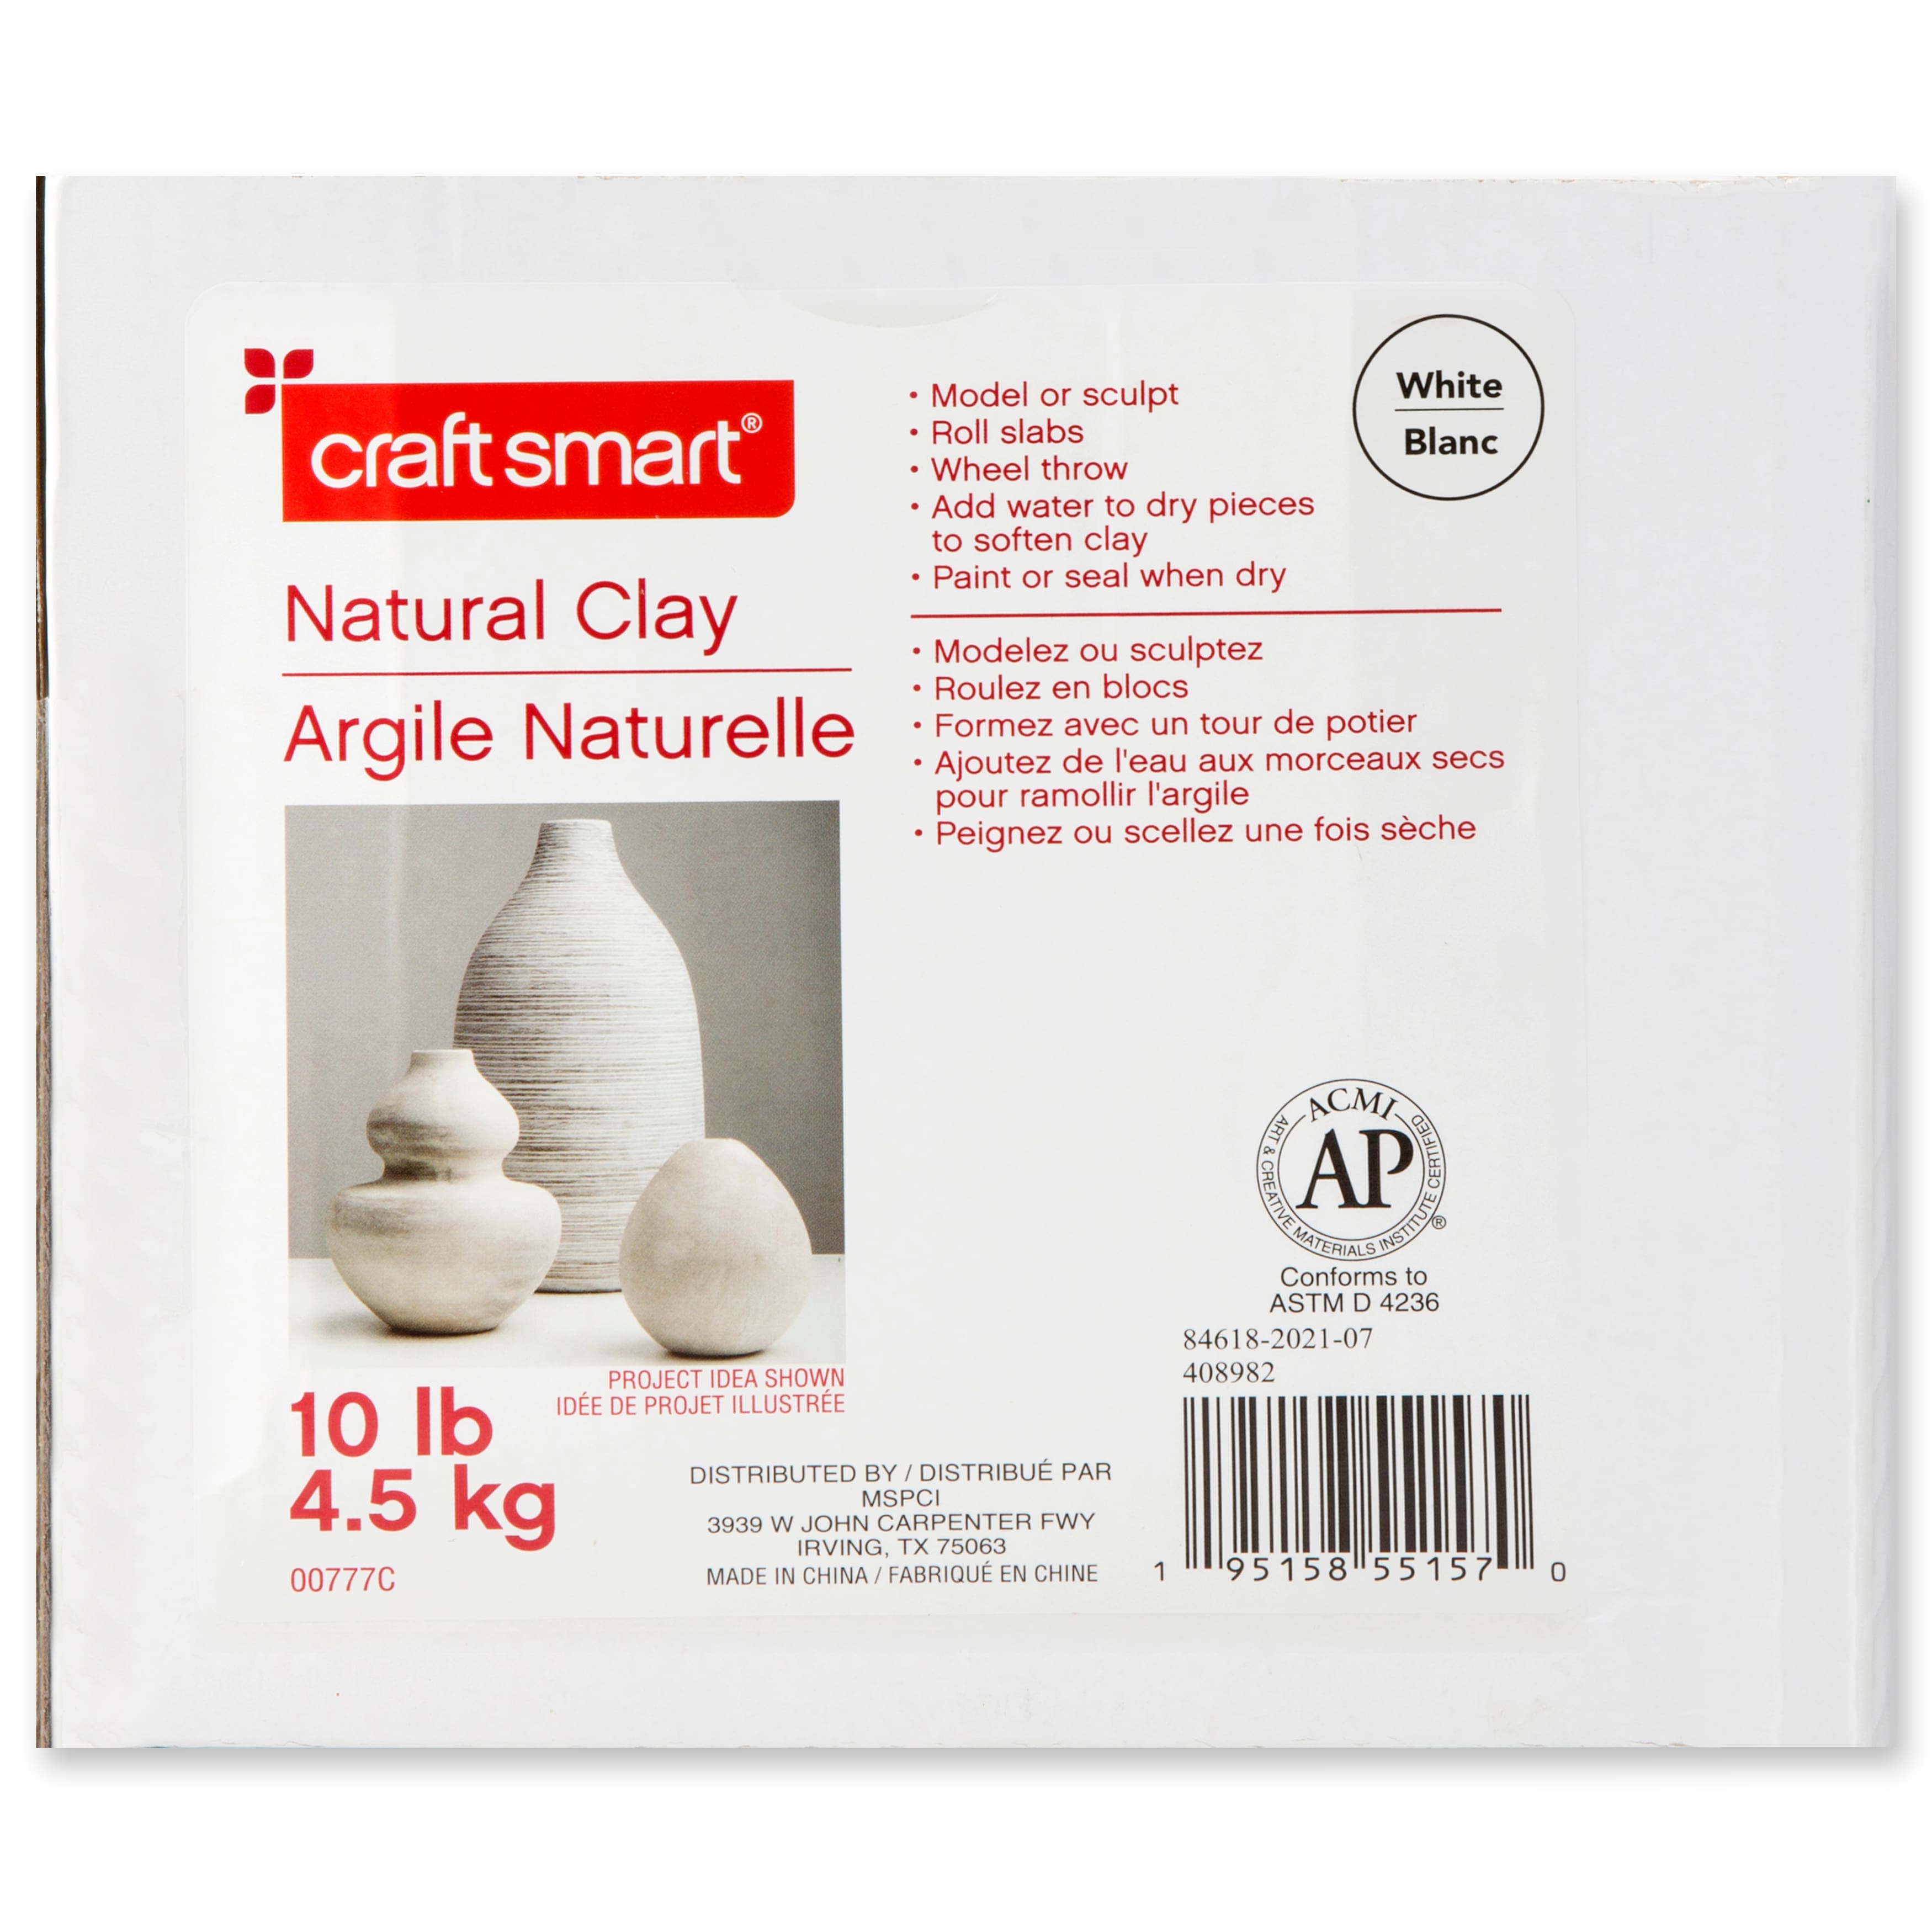 Modeling Clay Set by Craft Smart